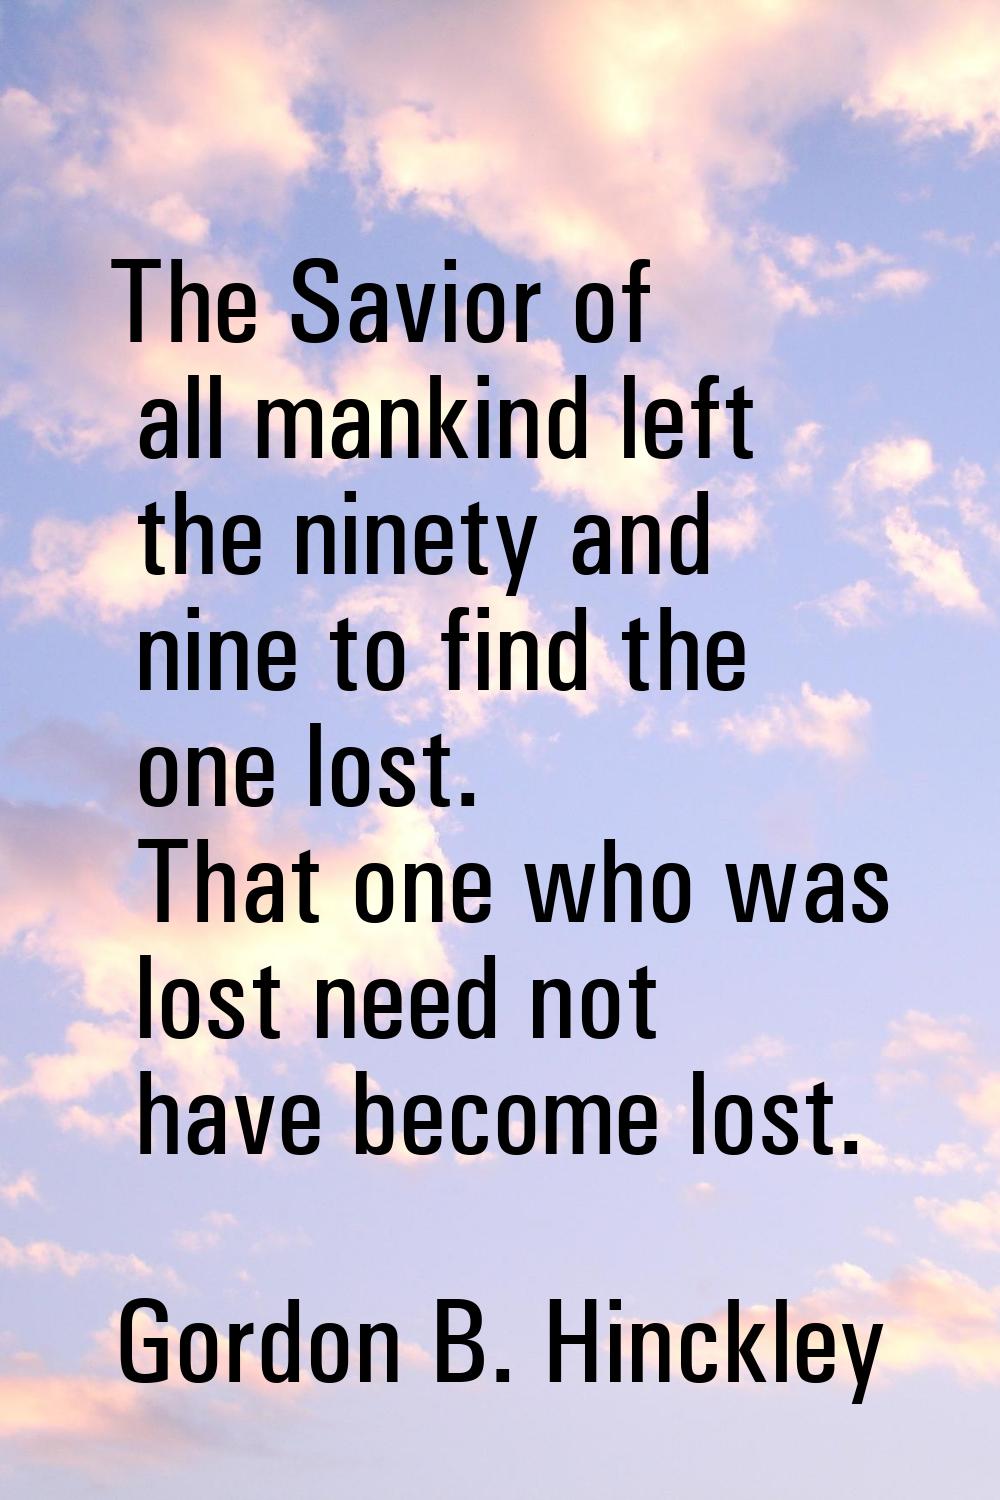 The Savior of all mankind left the ninety and nine to find the one lost. That one who was lost need